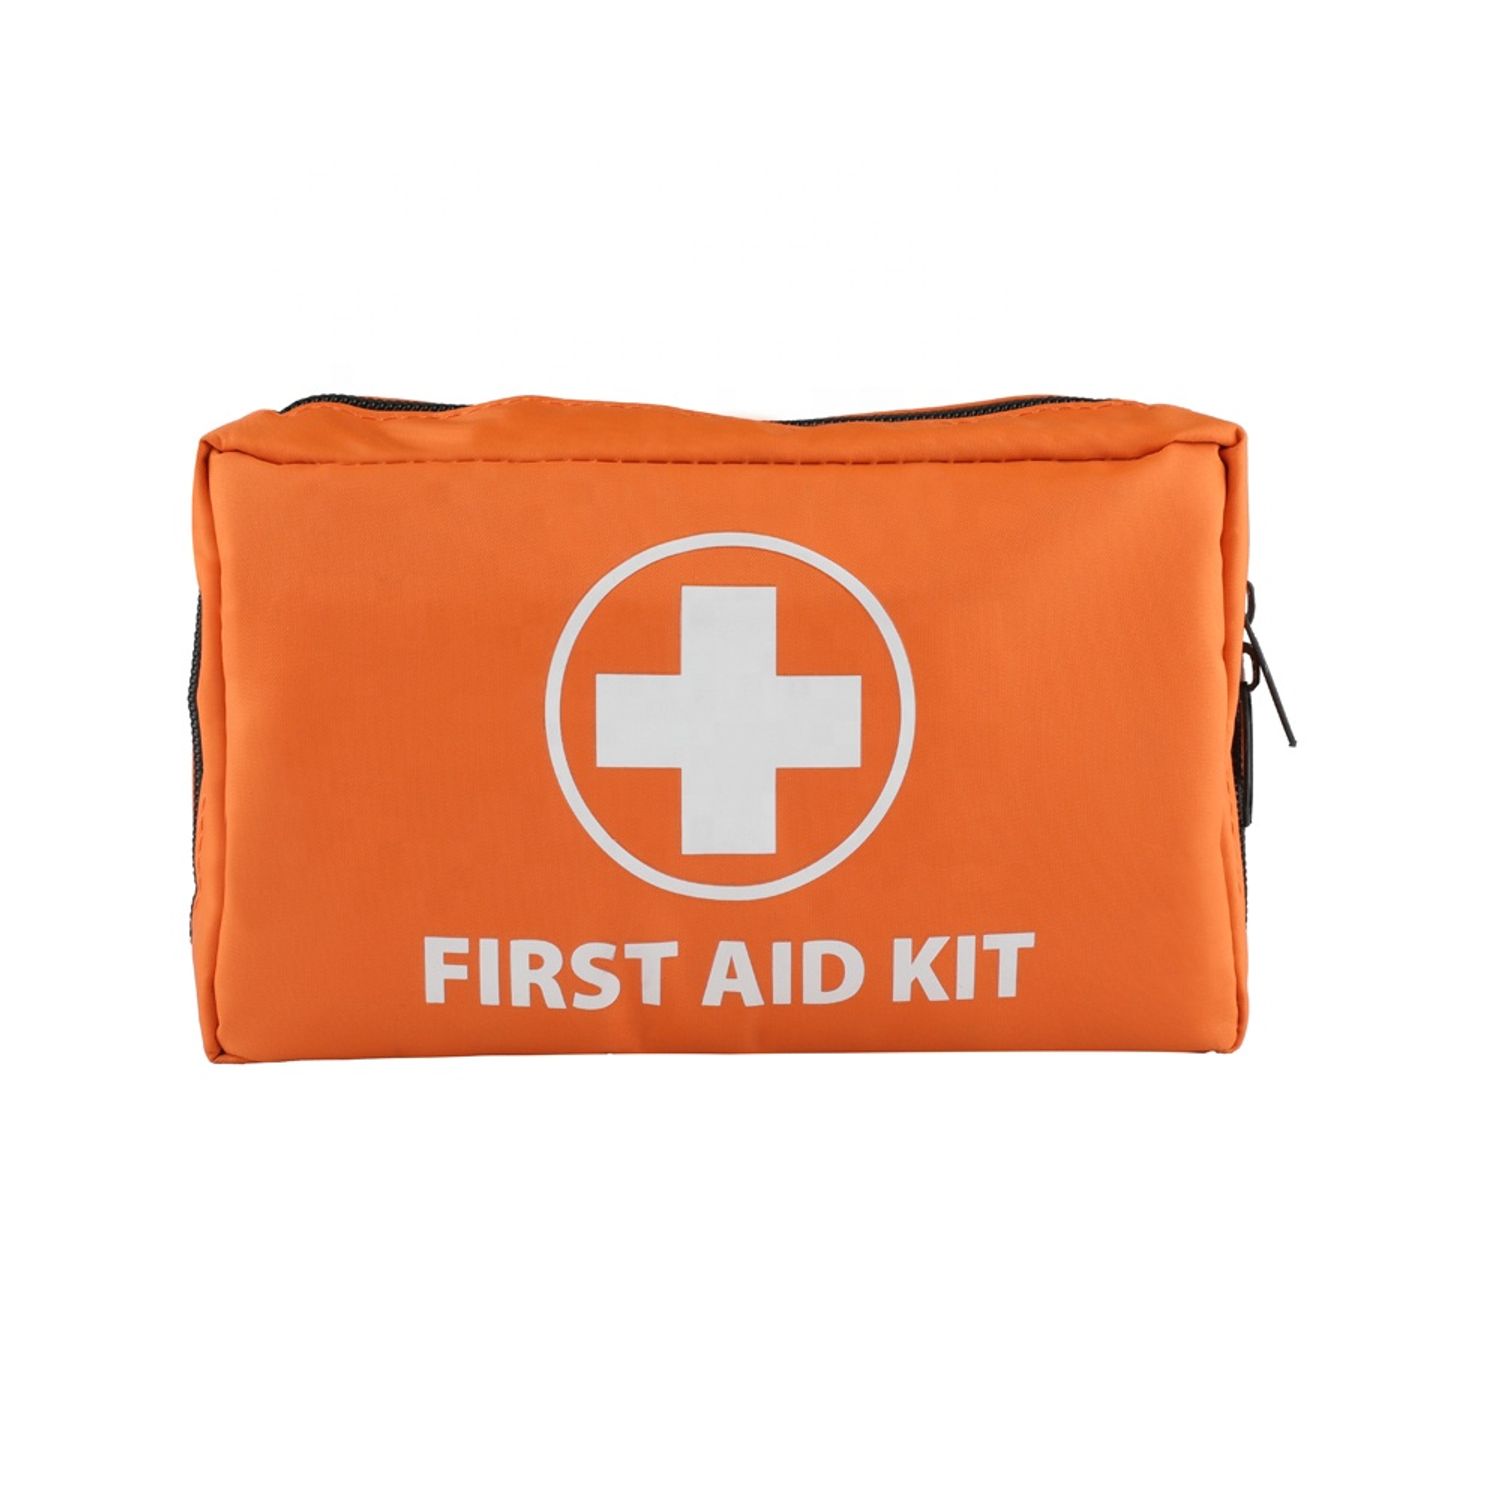 Risen Medical's wholesale orange first aid bag for camping hiking